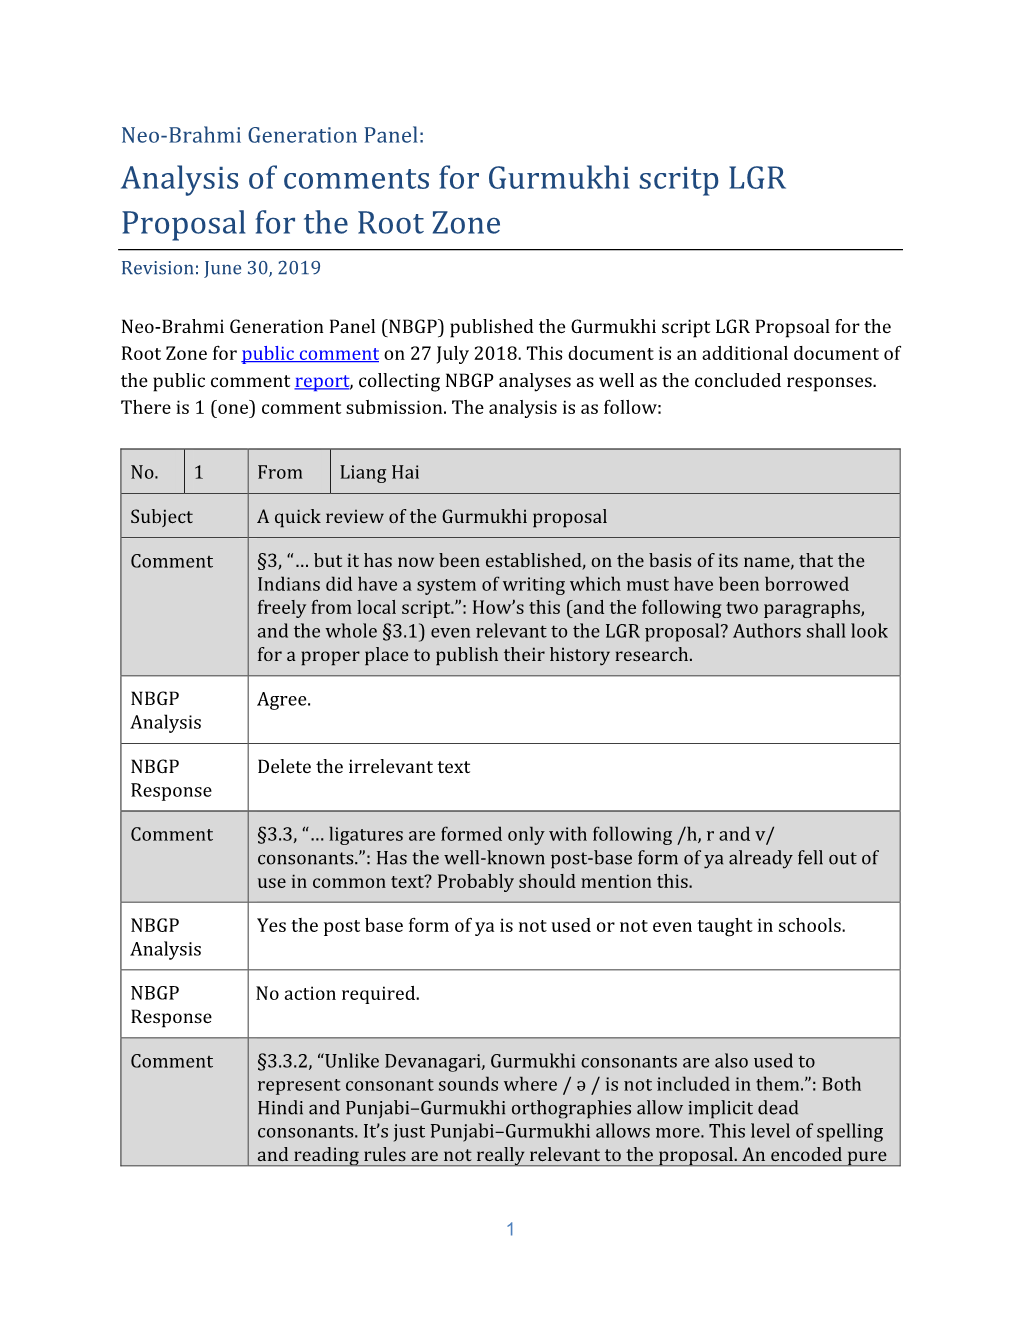 Analysis of Comments for Gurmukhi Scritp LGR Proposal for the Root Zone Revision: June 30, 2019